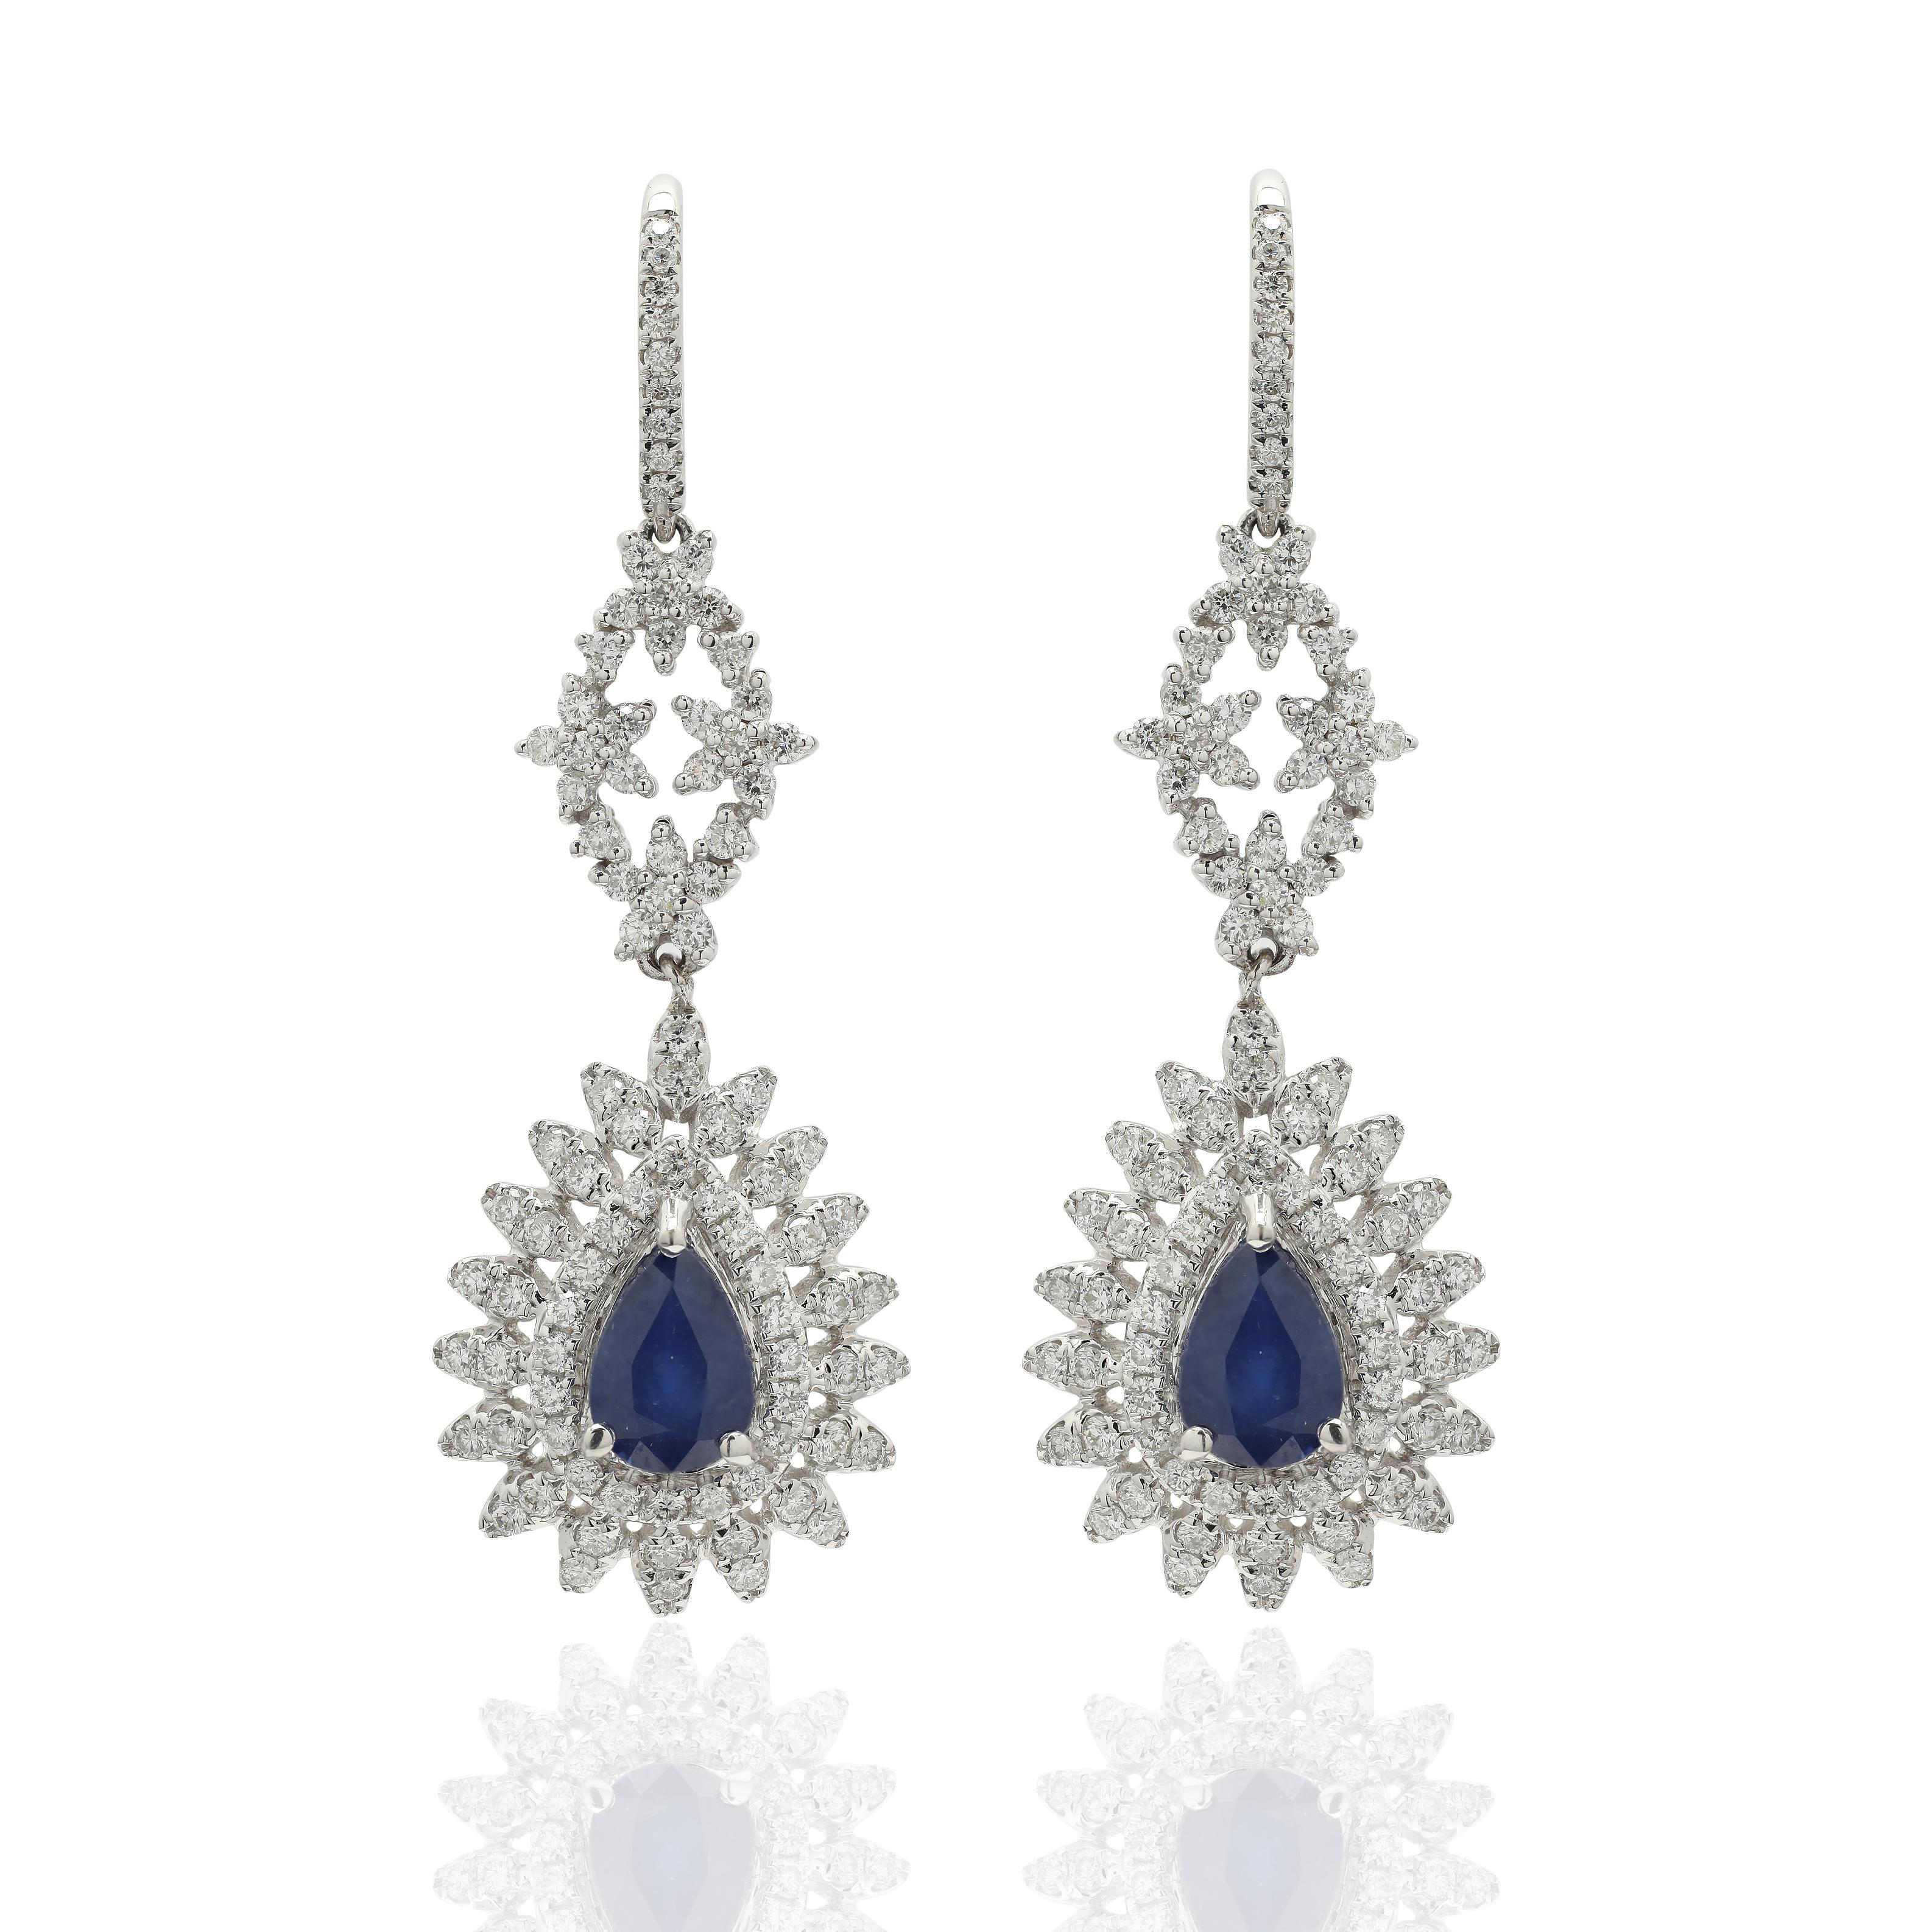 Blue Sapphire and Diamond Dangle Earrings to make a statement with your look. These earrings create a sparkling, luxurious look featuring pear cut gemstone.
If you love to gravitate towards unique styles, this piece of jewelry is perfect for